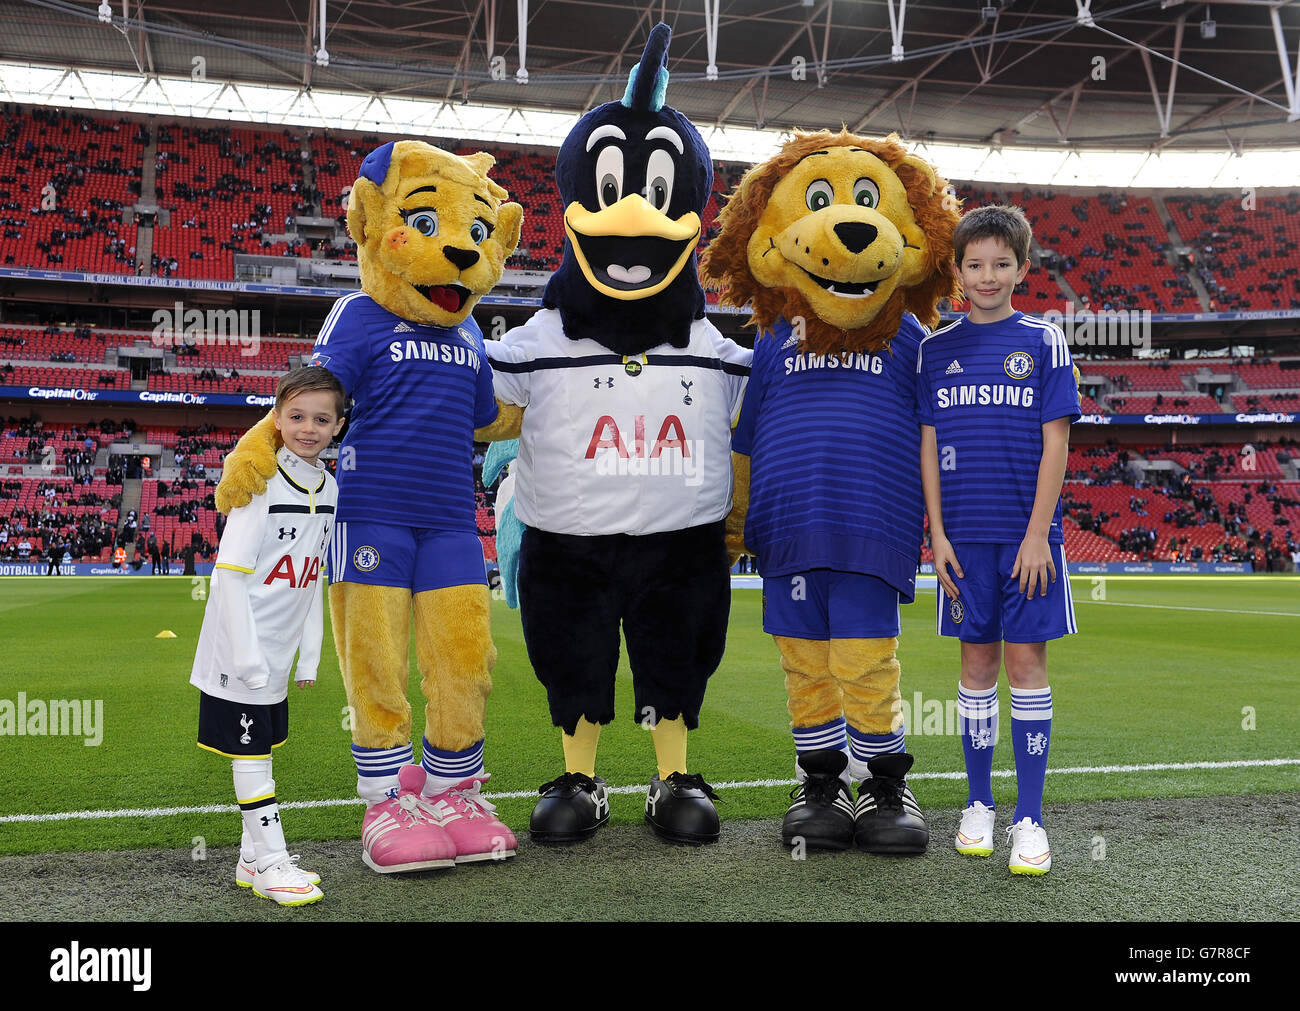 Tottenham Hotspur club mascot Chirpy Cockerel (centre) and the Chelsea mascots Stamford the Lion (right) and Bridgett the Lioness (left) with the two match day mascots. Stock Photo